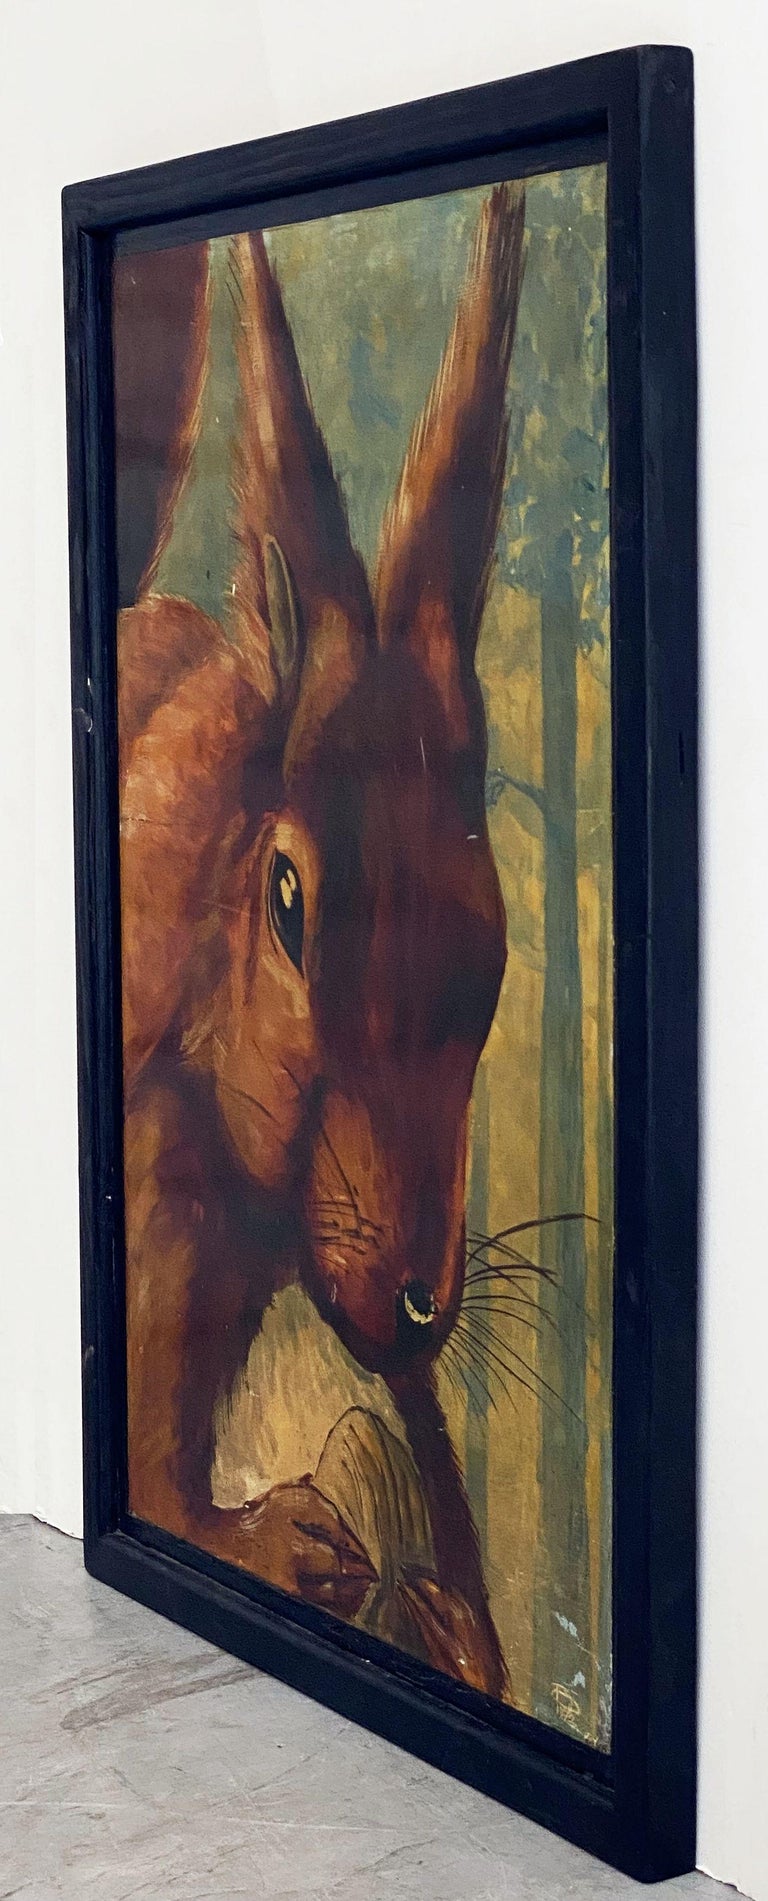 An authentic English pub sign (one-sided) featuring a painting of a squirrel with a nut, untitled.

A very fine example of vintage advertising artwork and ready for display.